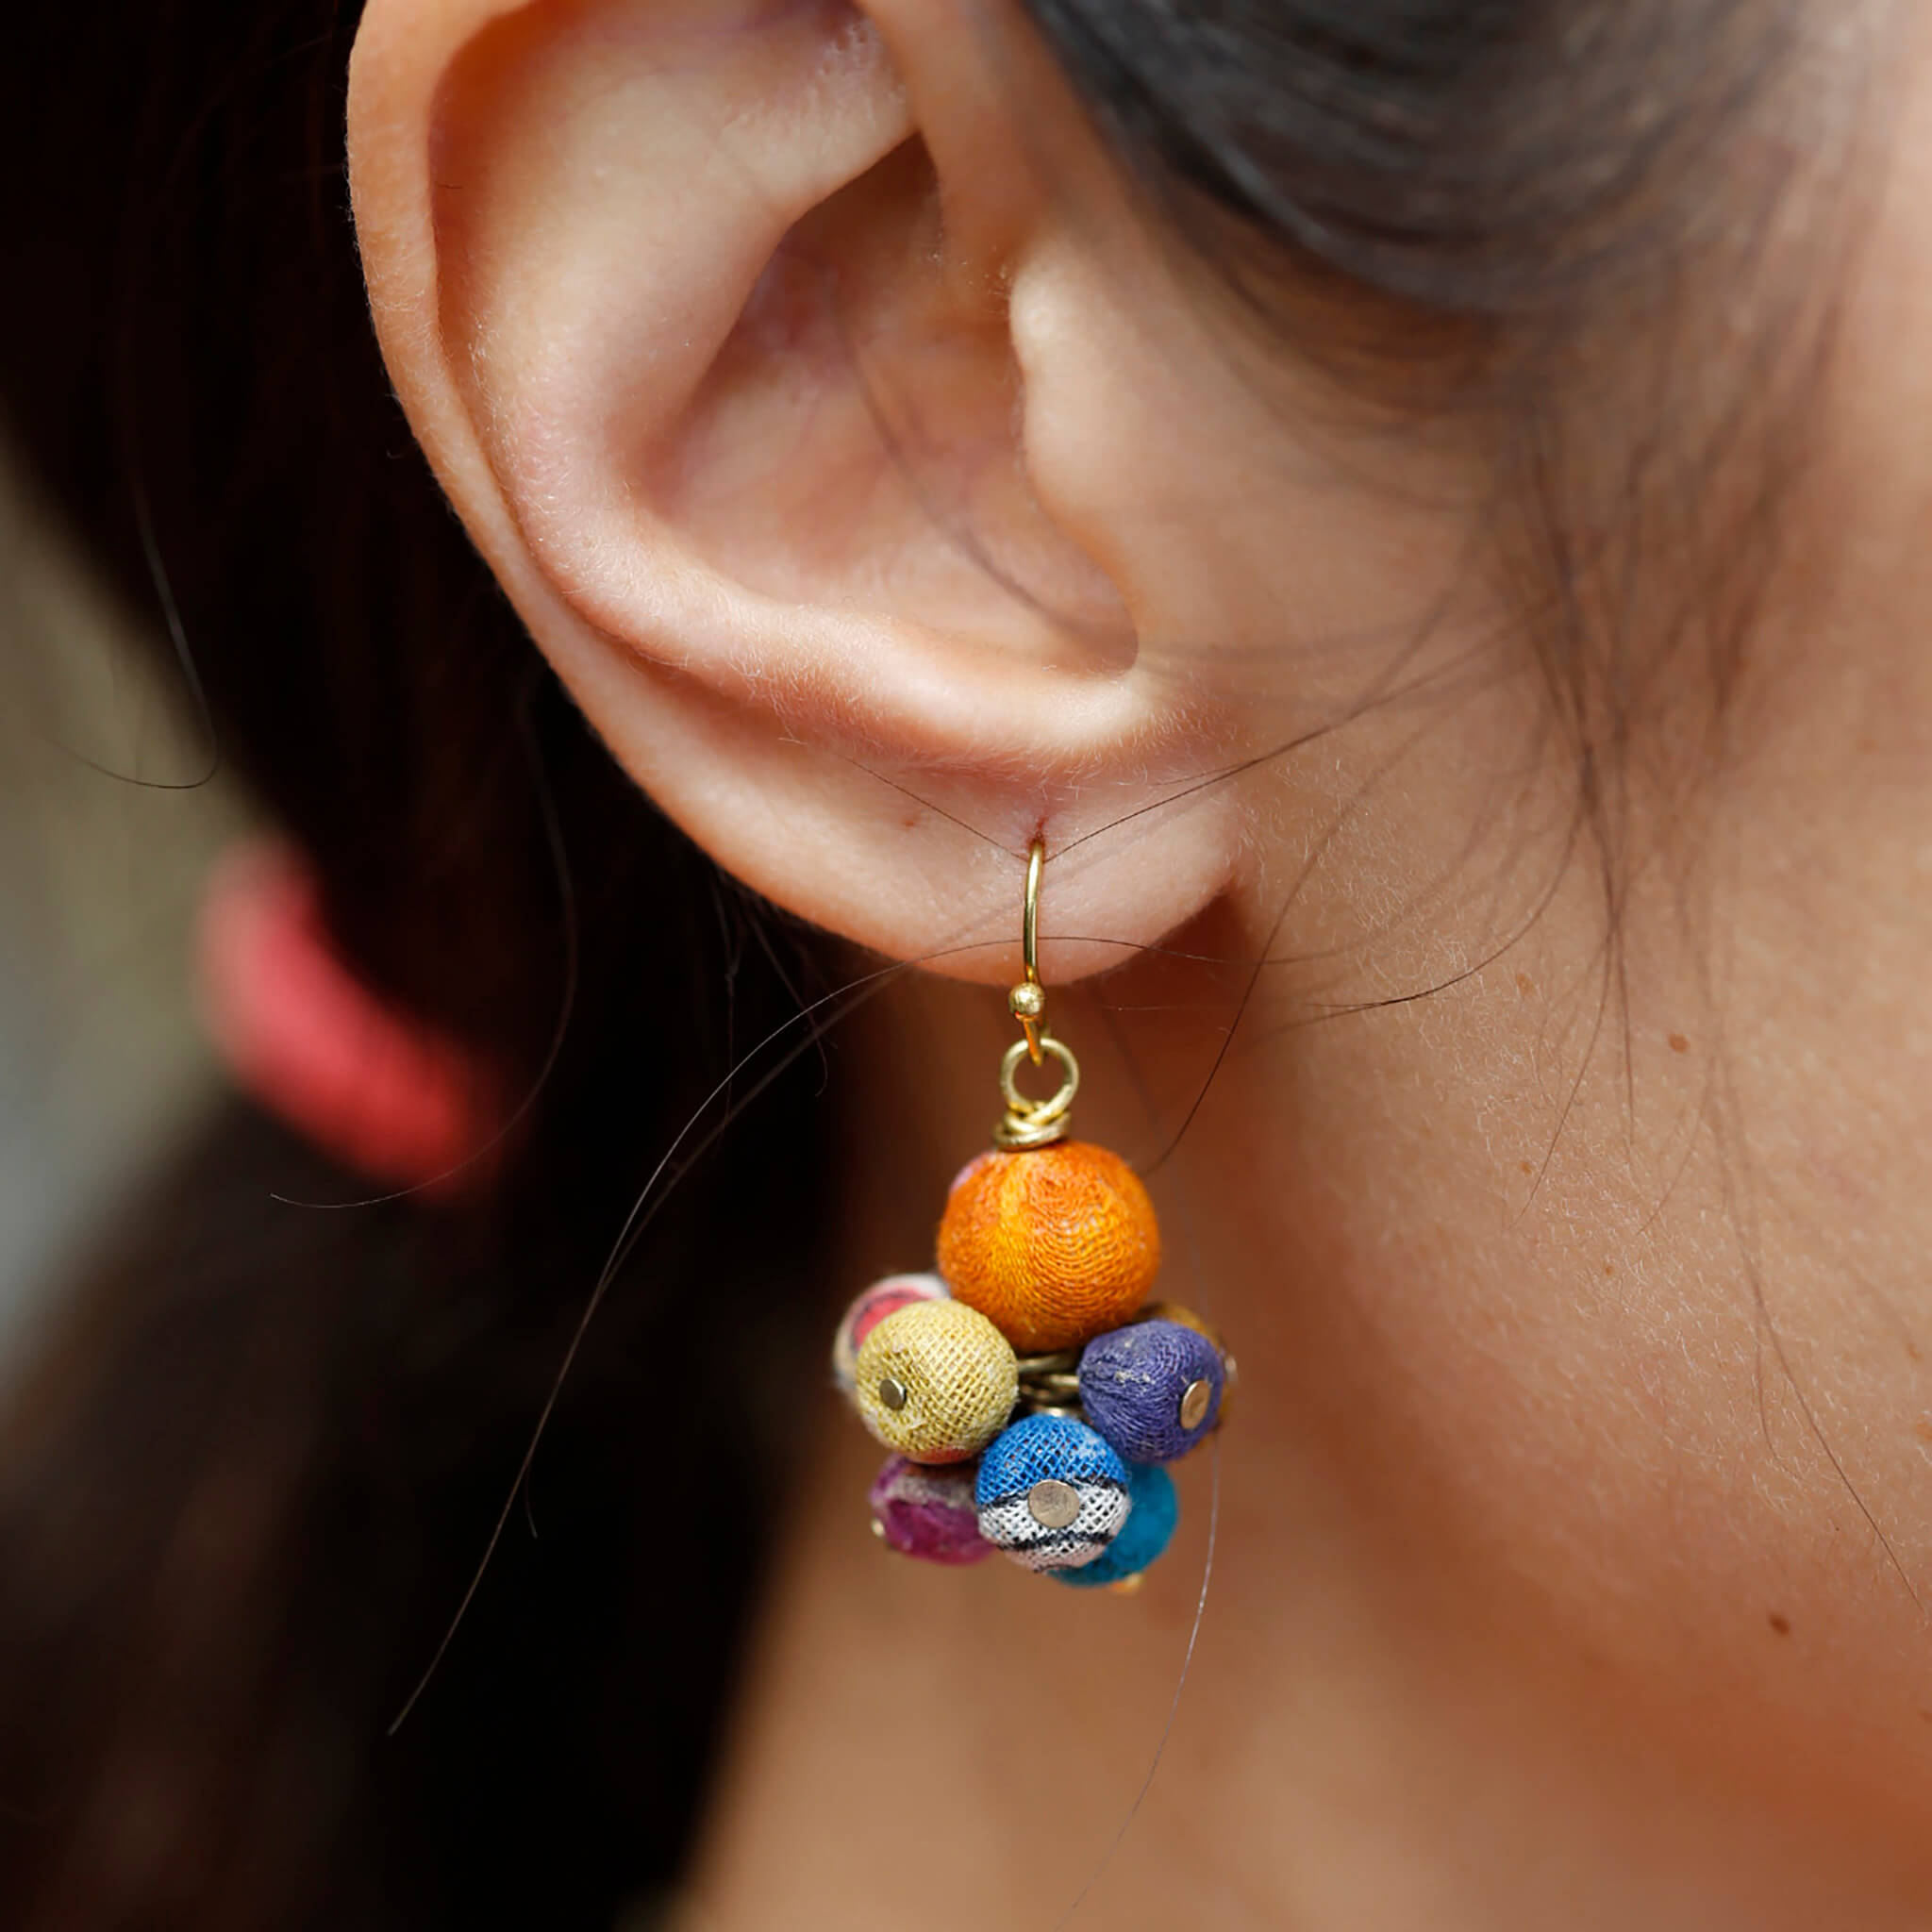 A close-up of a woman's ear wearing the Kantha Drop Earrings.